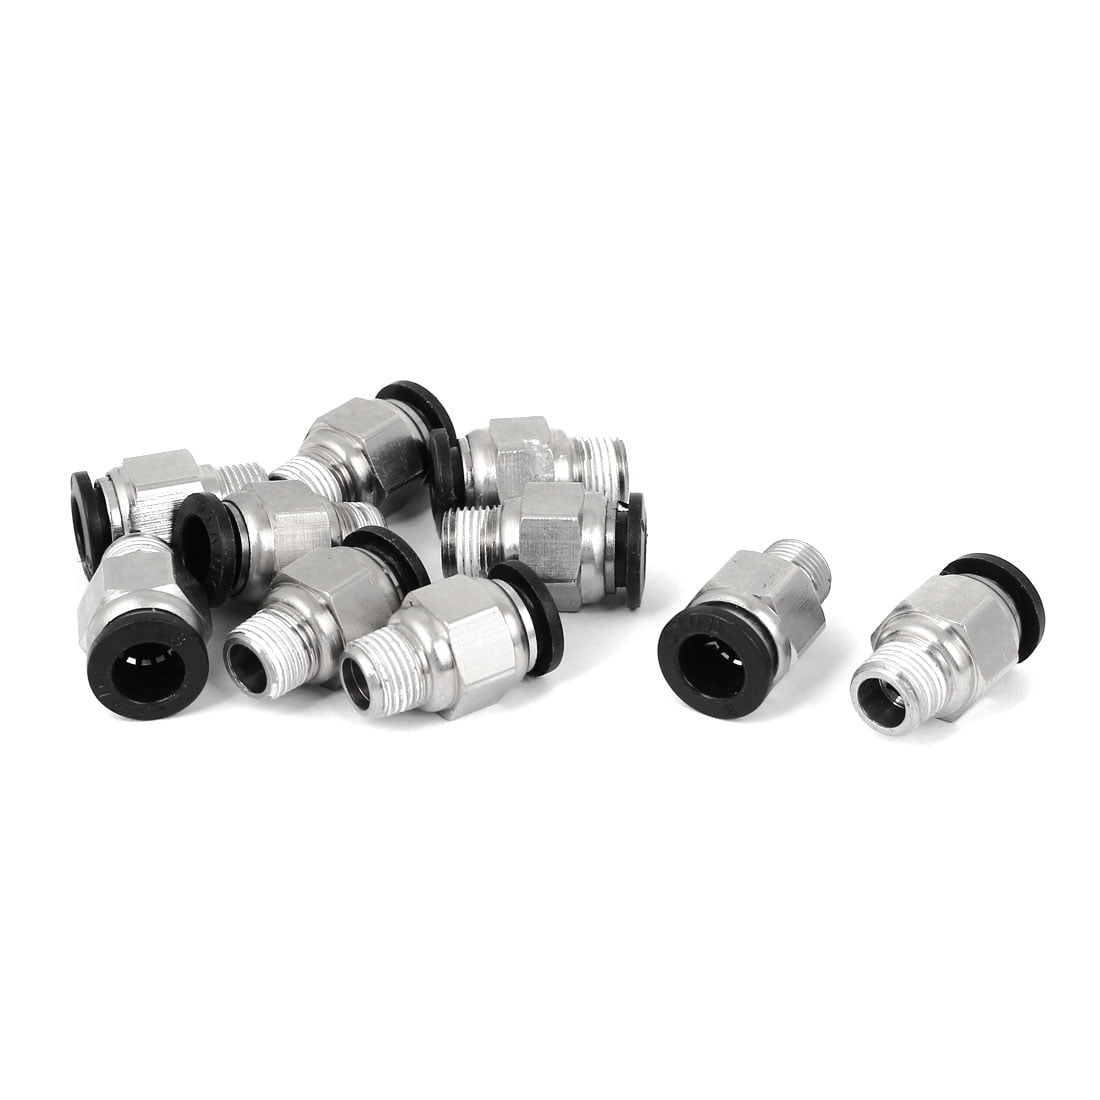 10 PCS 8mm Pneumatic Air Quick Push to Connect Fitting Straight Tube、 ZF 